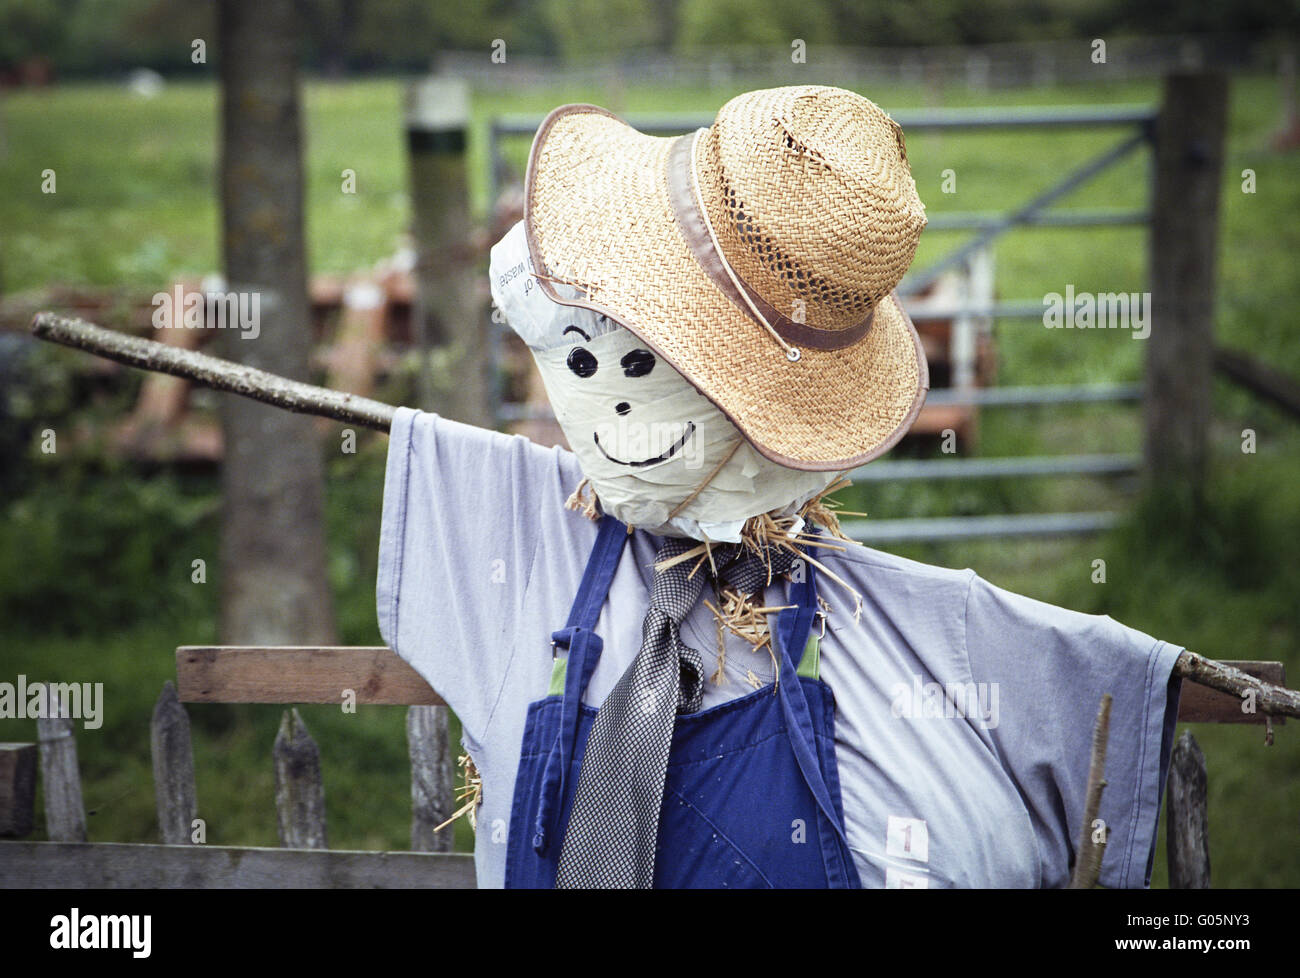 Stylish scarecrow with tie and hat Stock Photo